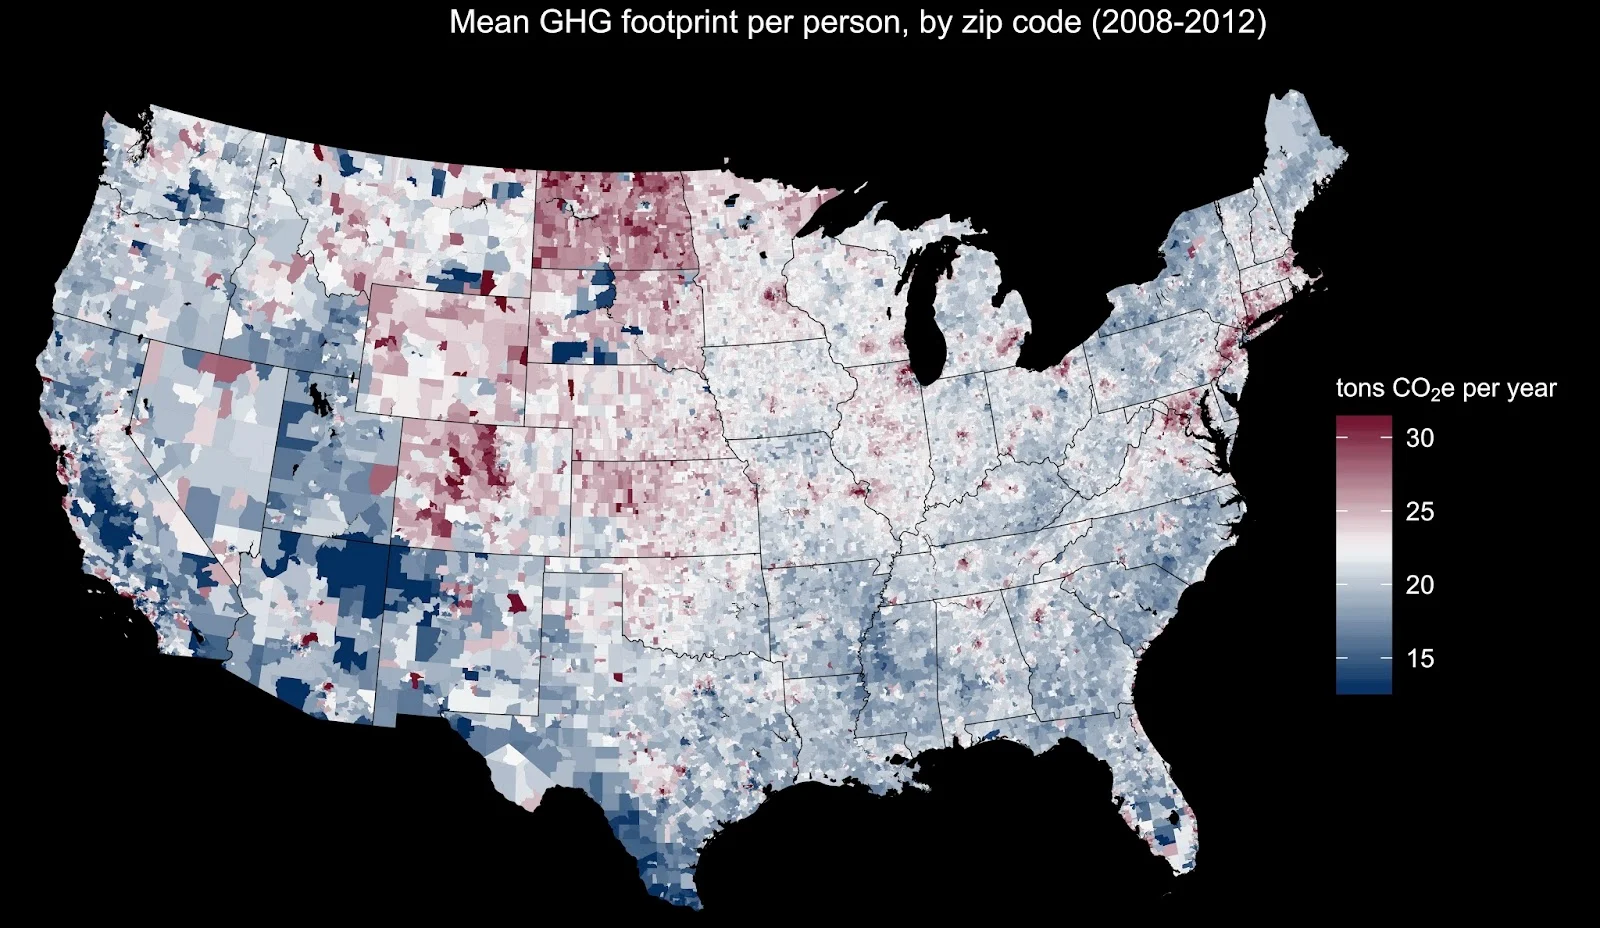 Mean greenhouse gas per person, by zip code (2008 - 2012)